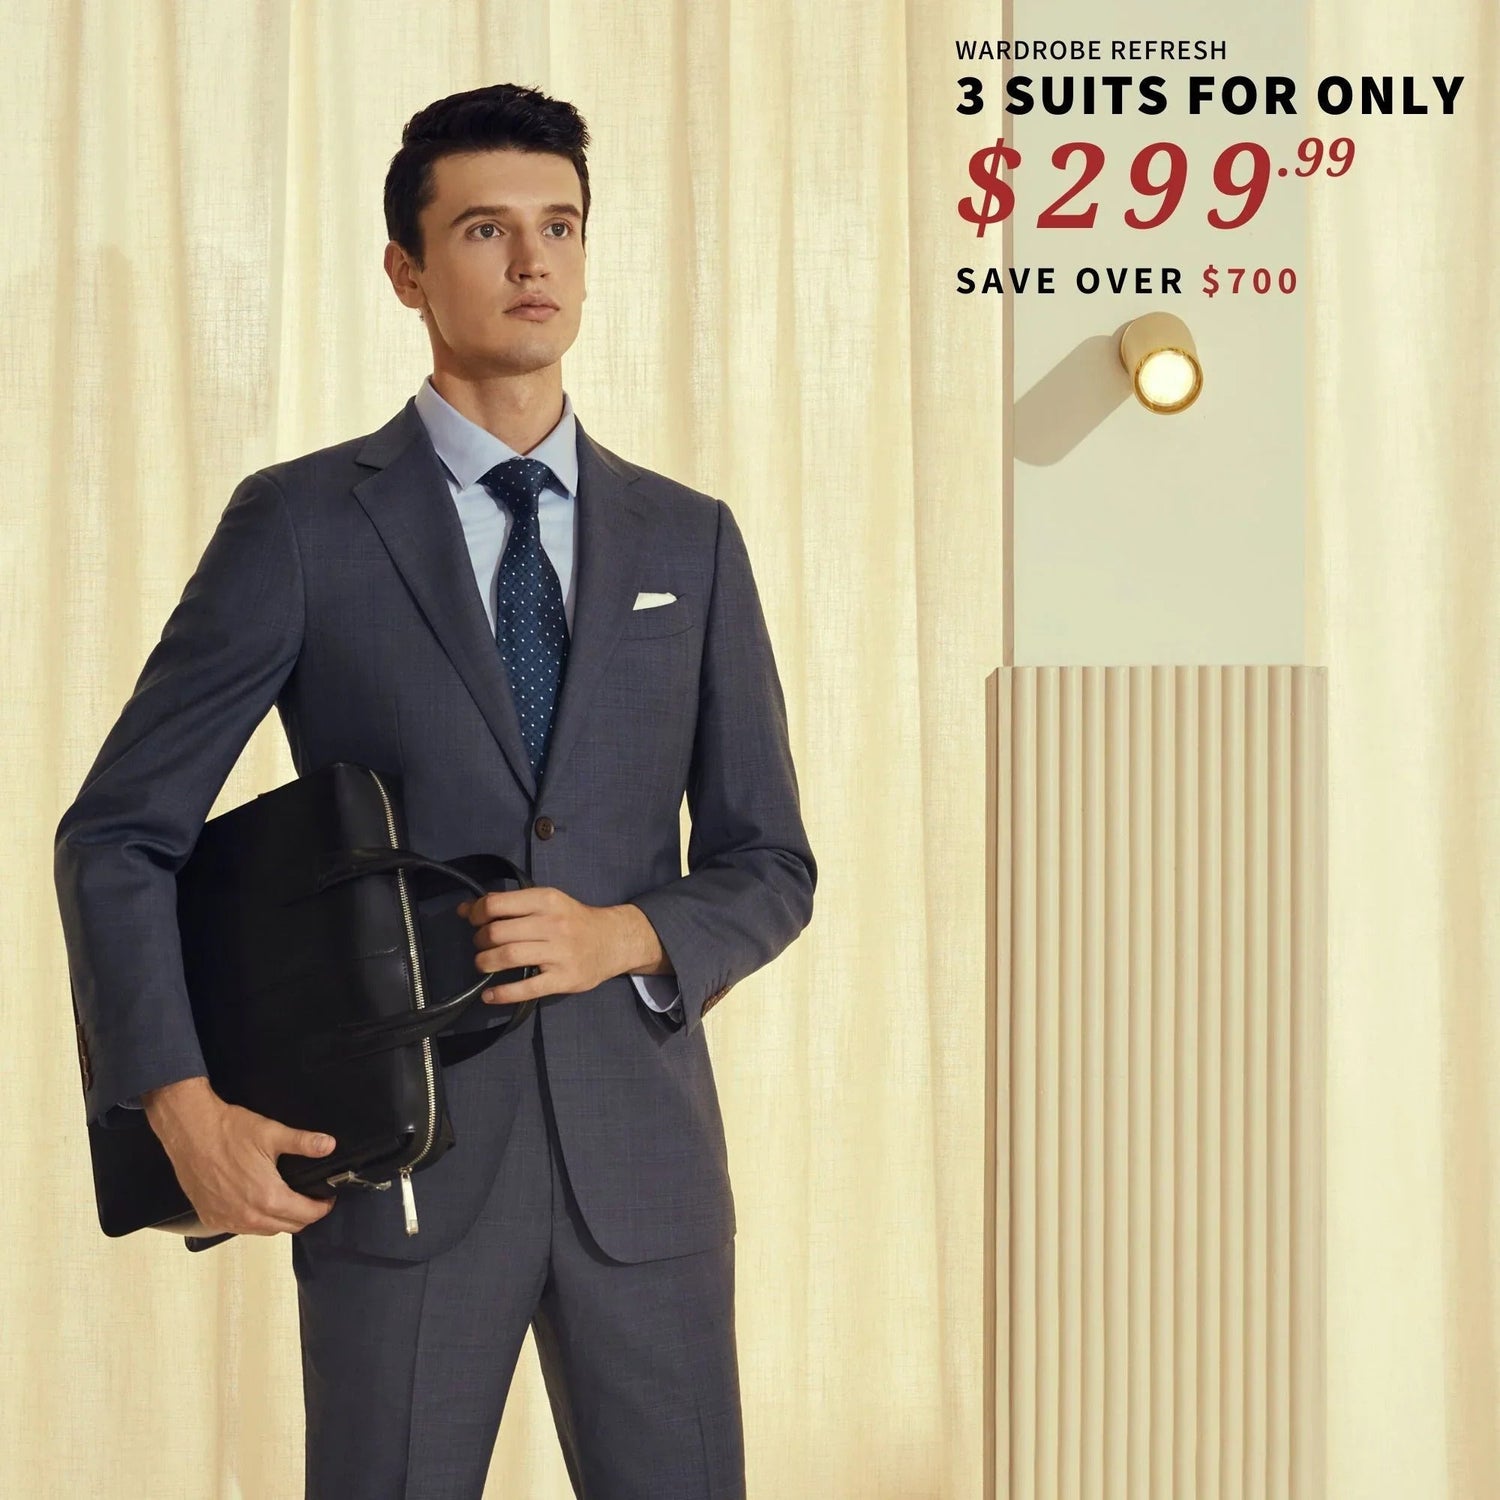 A man in a BYOB 3 Suits for $299 suit is holding a briefcase.